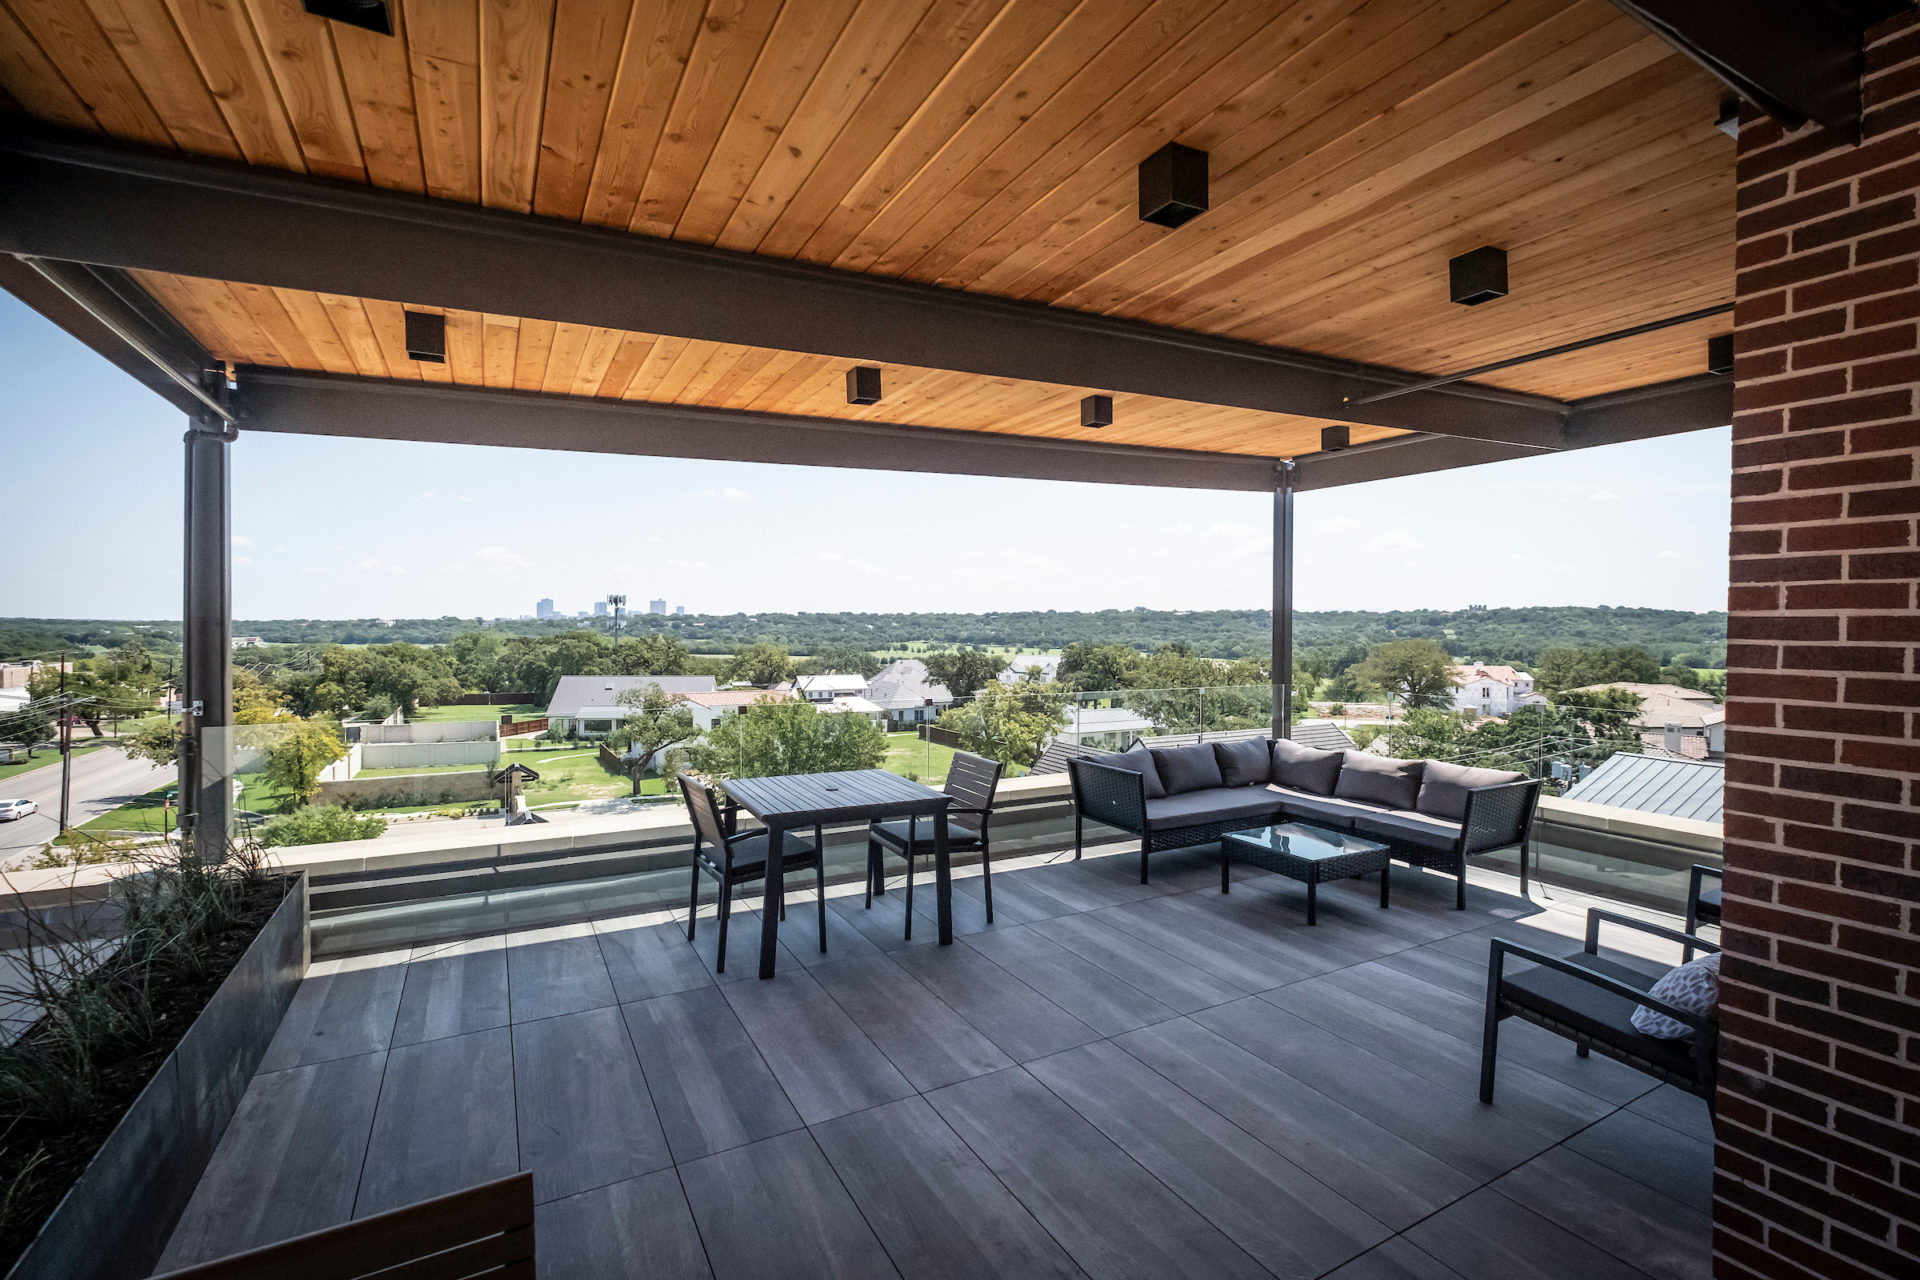 View of the rooftop balcony of 101 Nursery Lane with multiple seating arrangements and a view of downtown Fort Worth